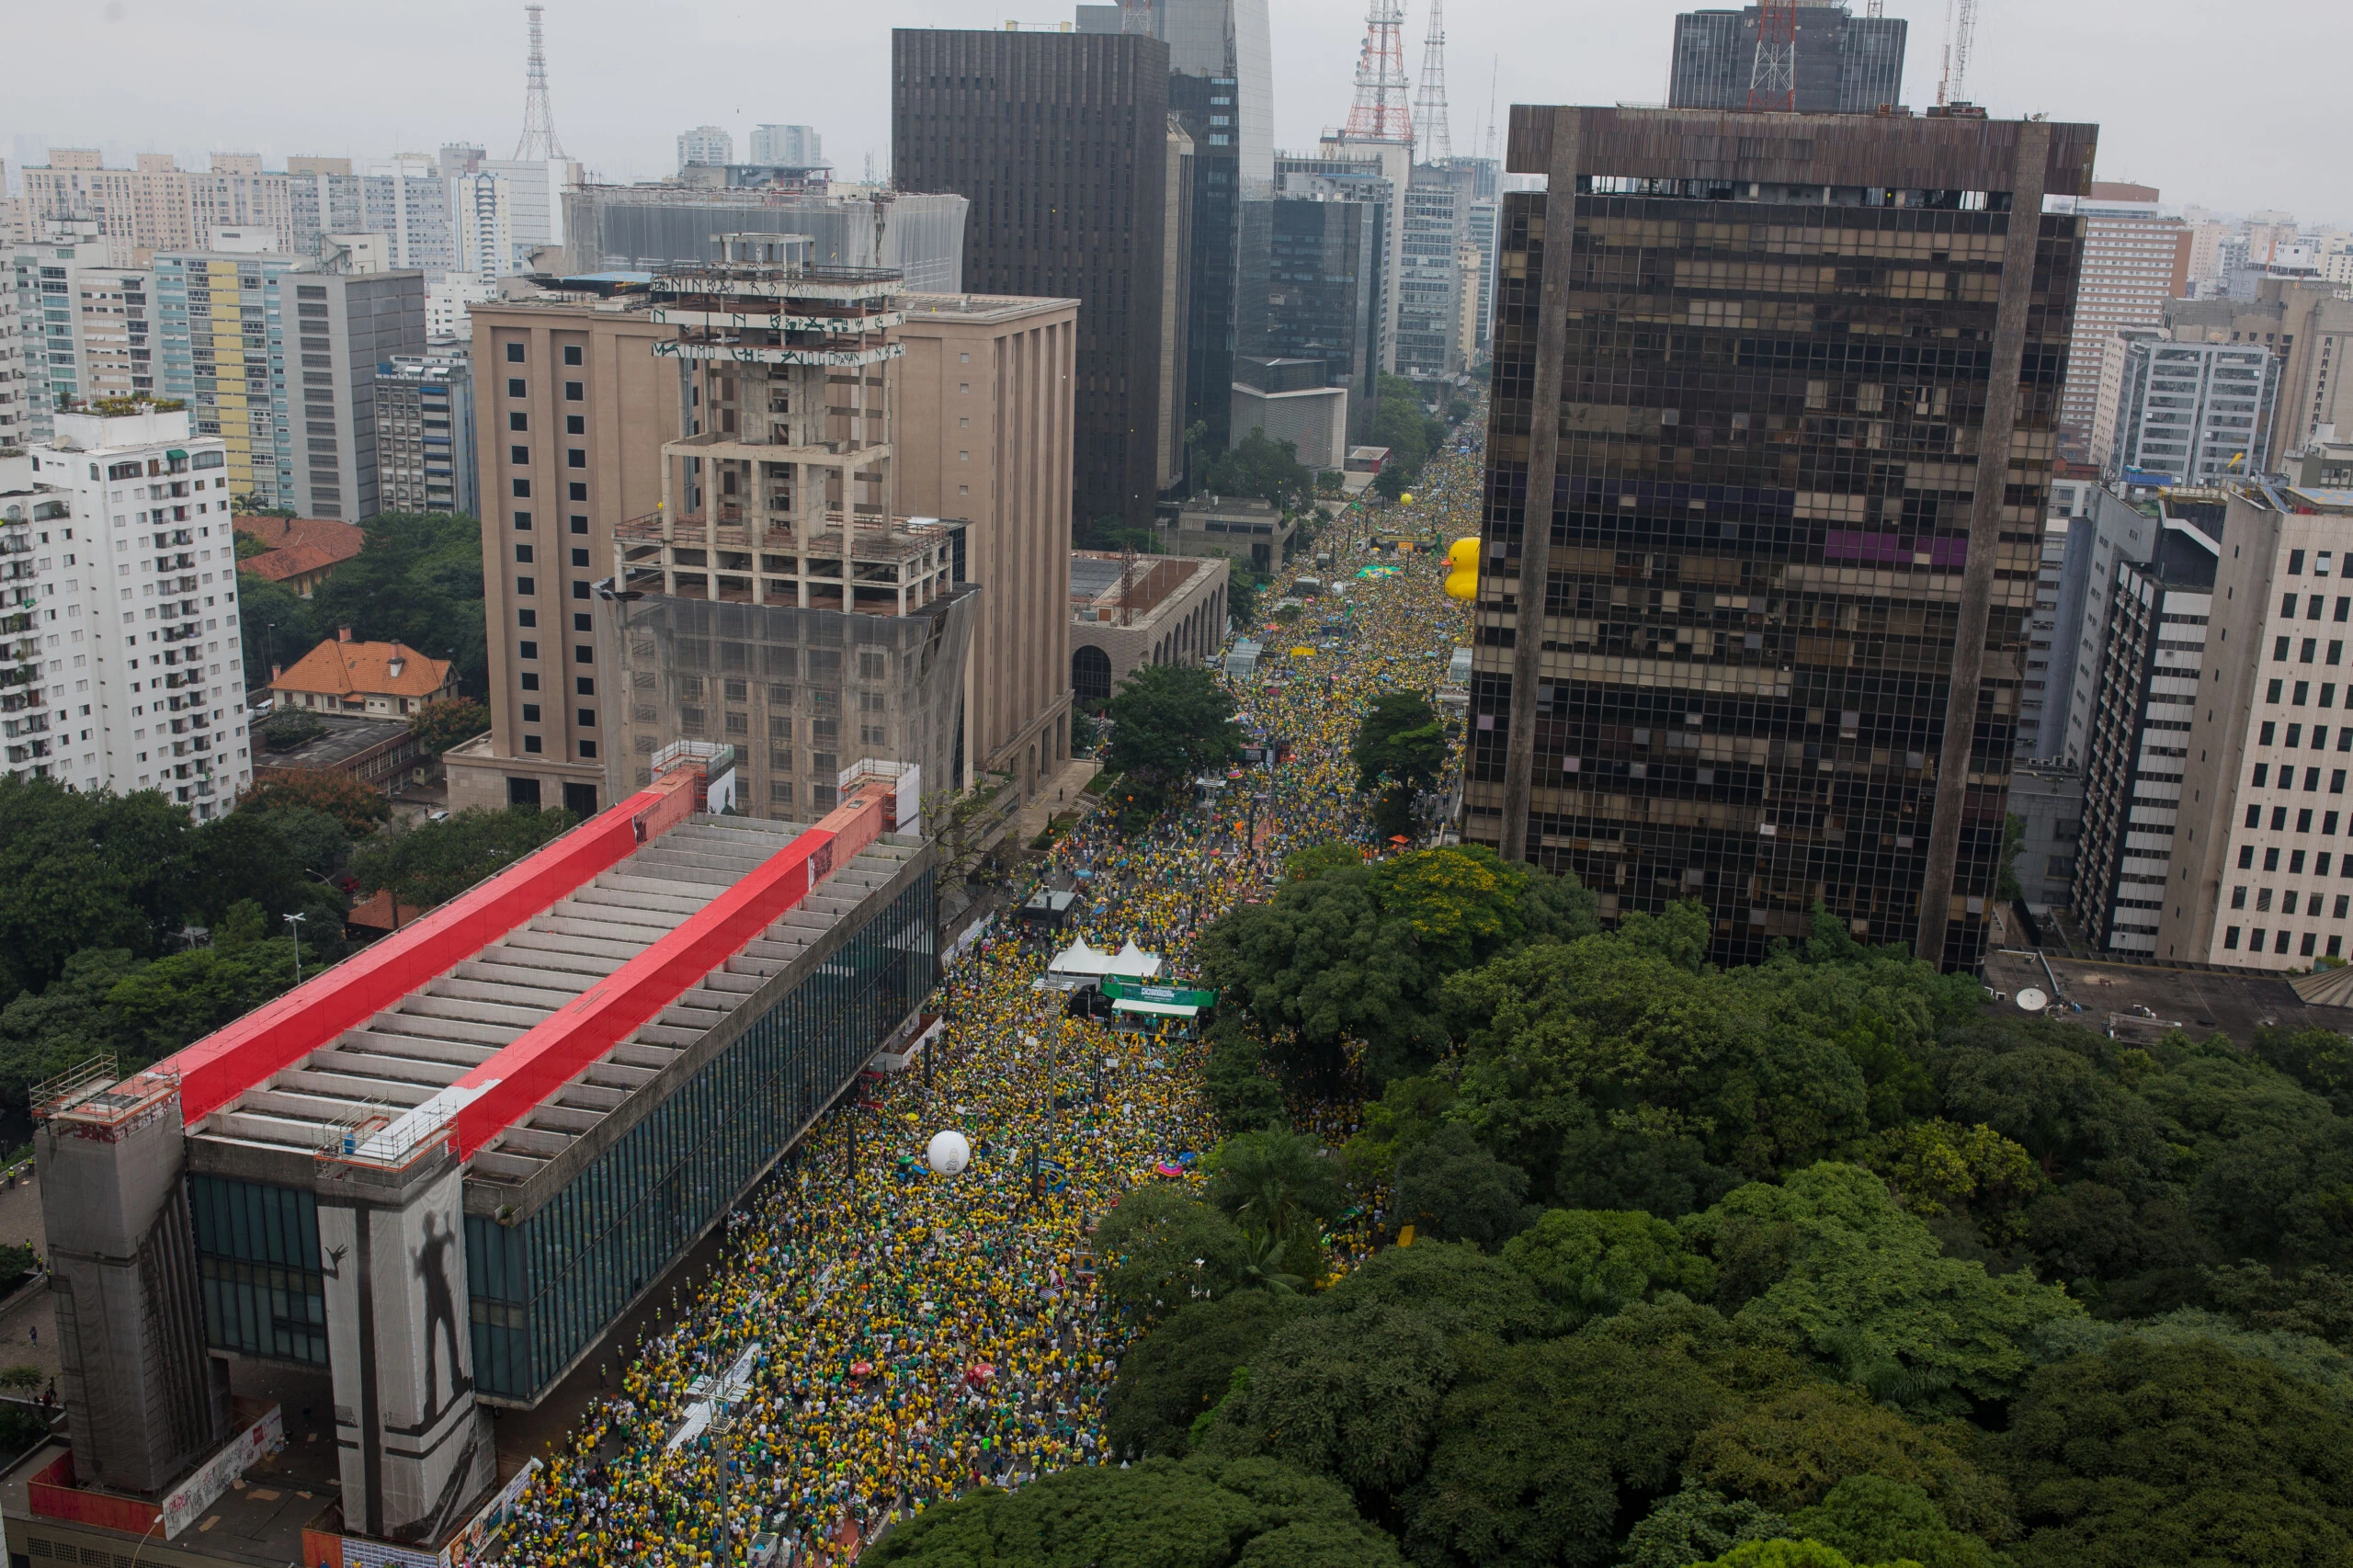 SAO PAULO, BRAZIL - MARCH 13: Protestors demonstrate demanding the removal of President Dilma Rousseff on March 13, 2016 in Sao Paulo, Brazil. Demonstrations across the country today called for President Rousseff's exit amidst a massive corruption scandal and a deep economic recession. (Photo by Victor Moriyama/Getty Images)